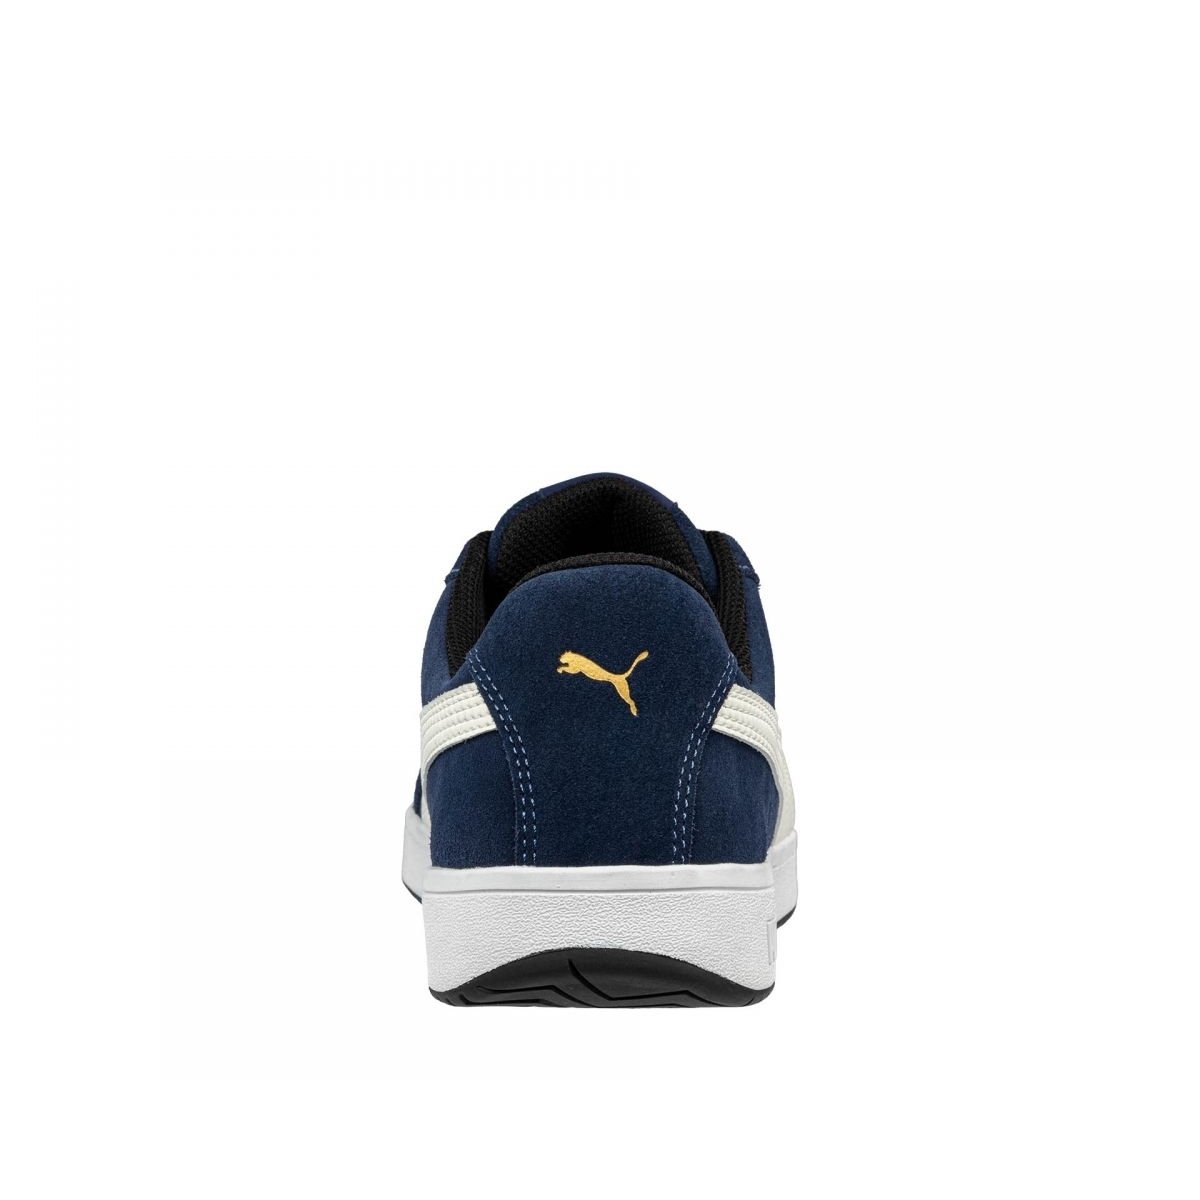 PUMA Safety Men's Iconic Low Composite Toe EH Work Shoes Navy Suede - 640025 ONE SIZE Navy - Navy, 9.5